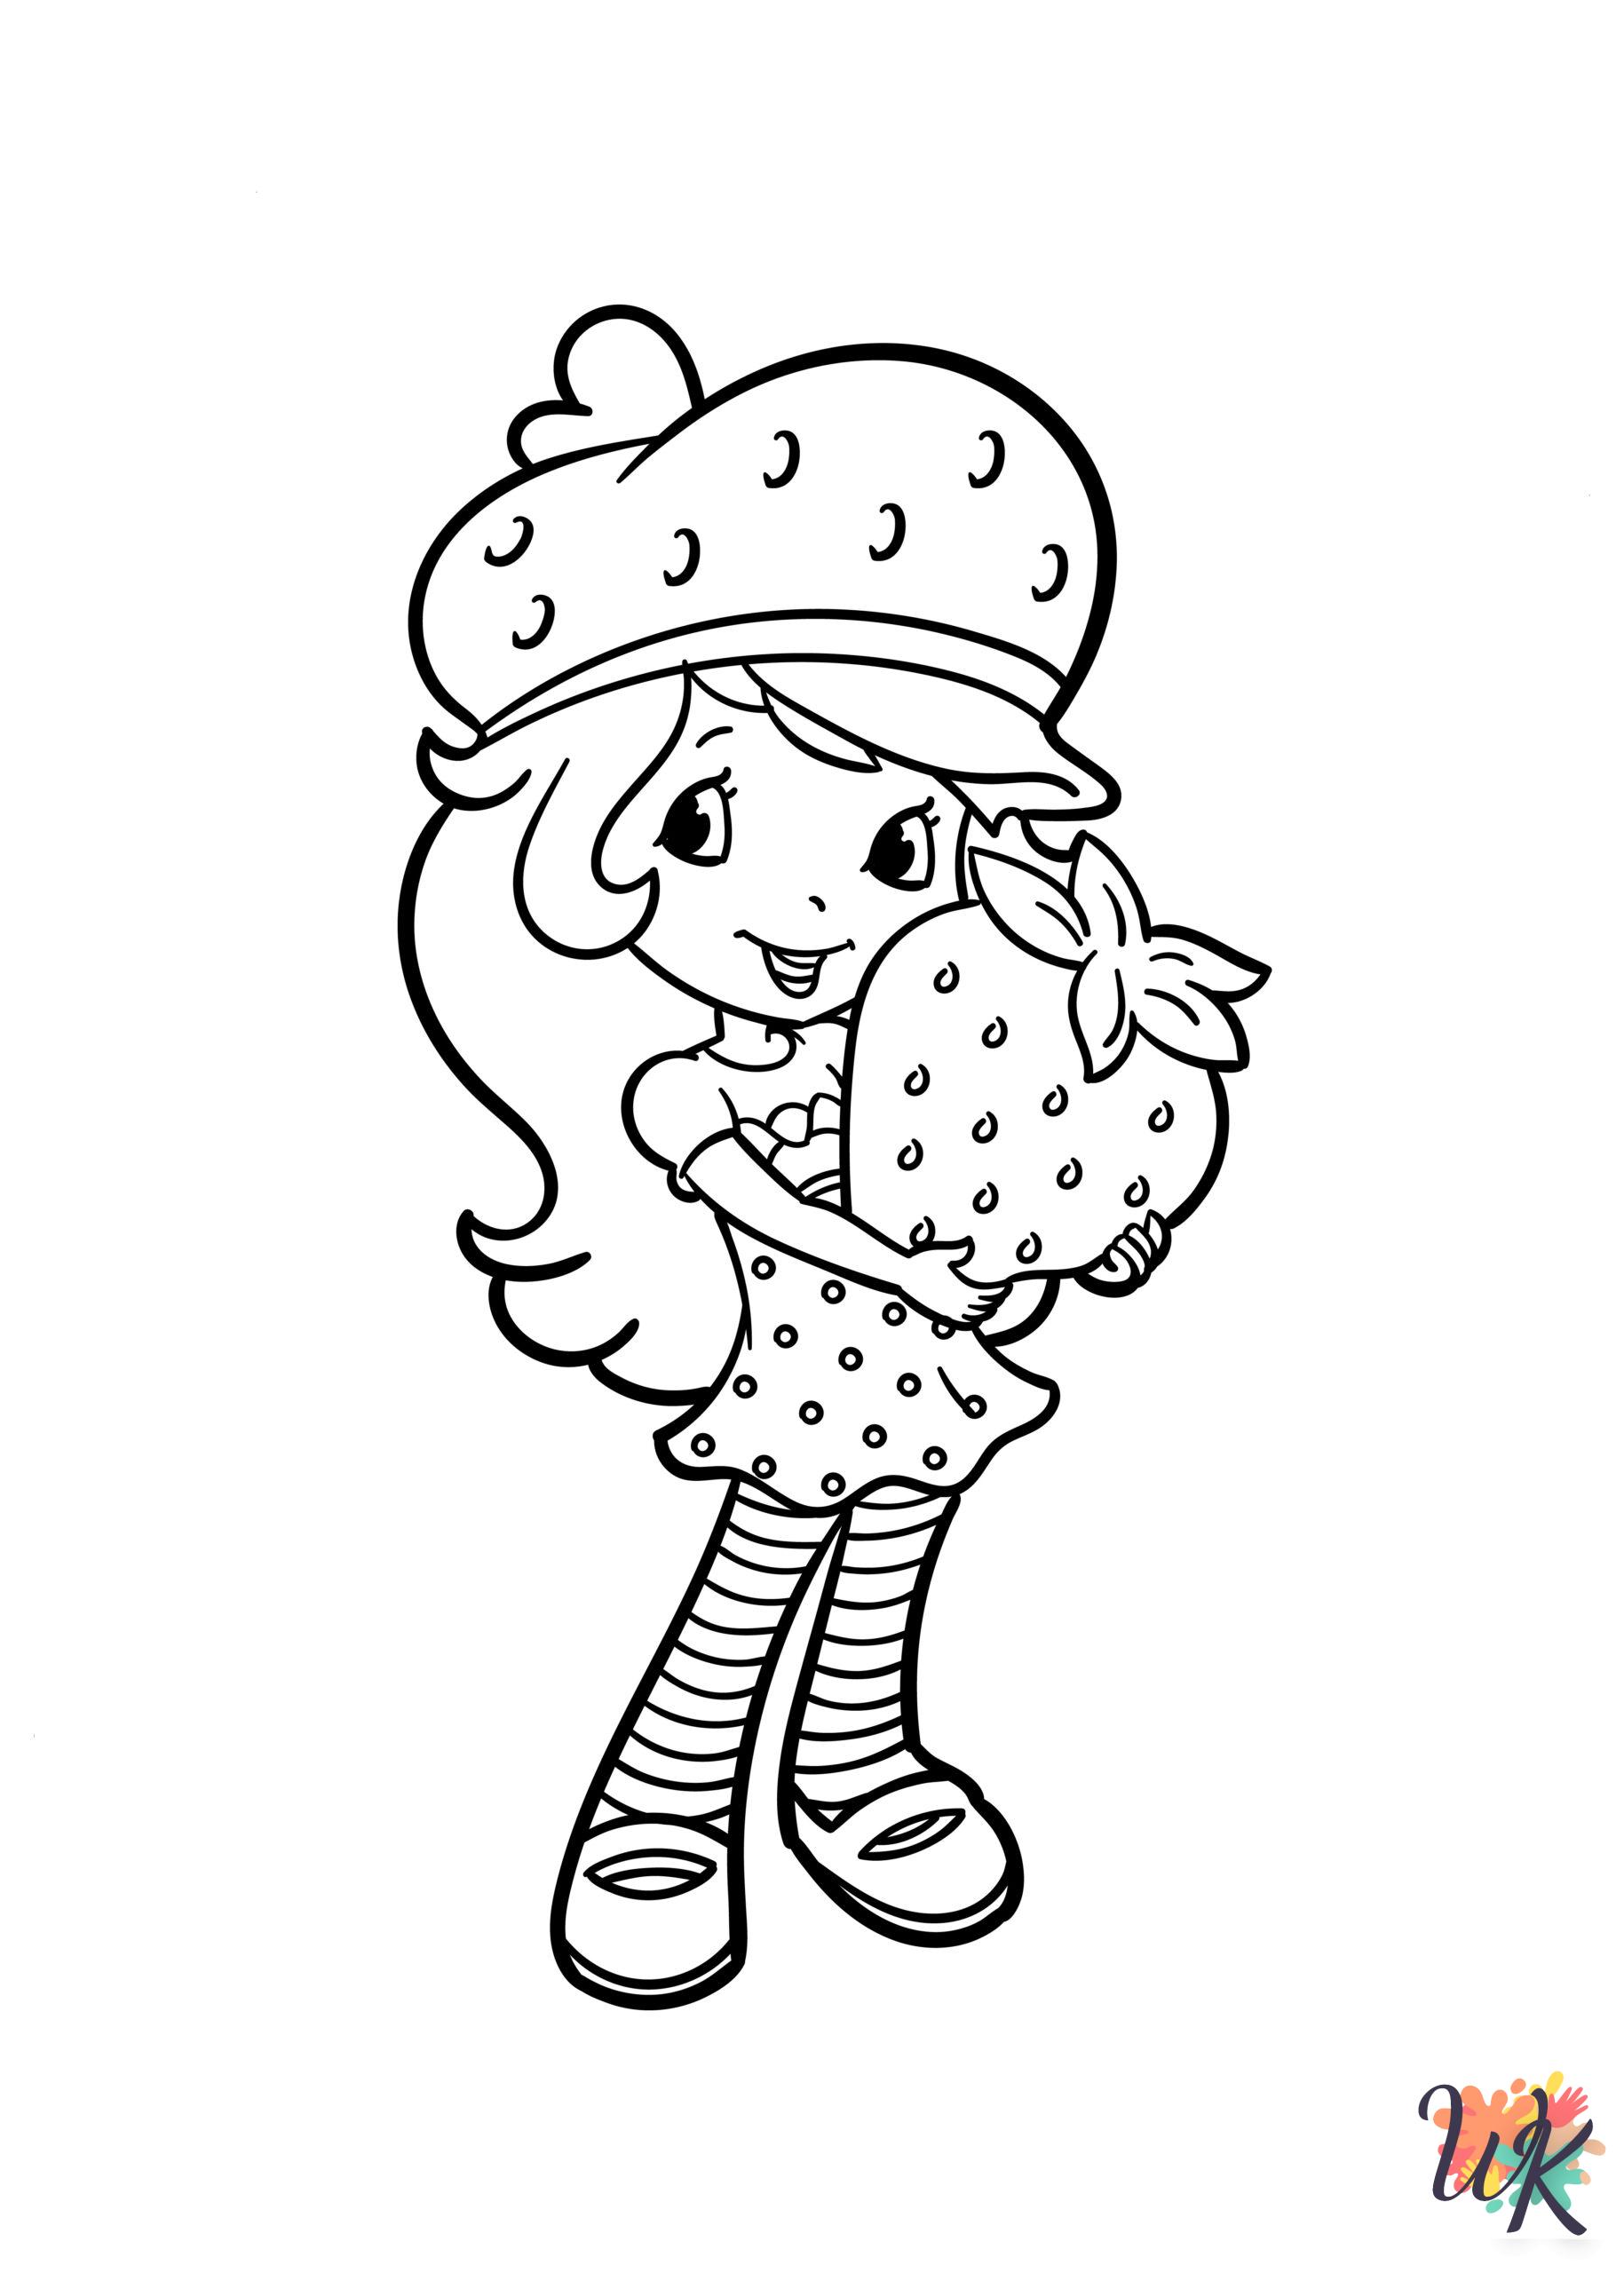 Strawberry Shortcake coloring pages easy